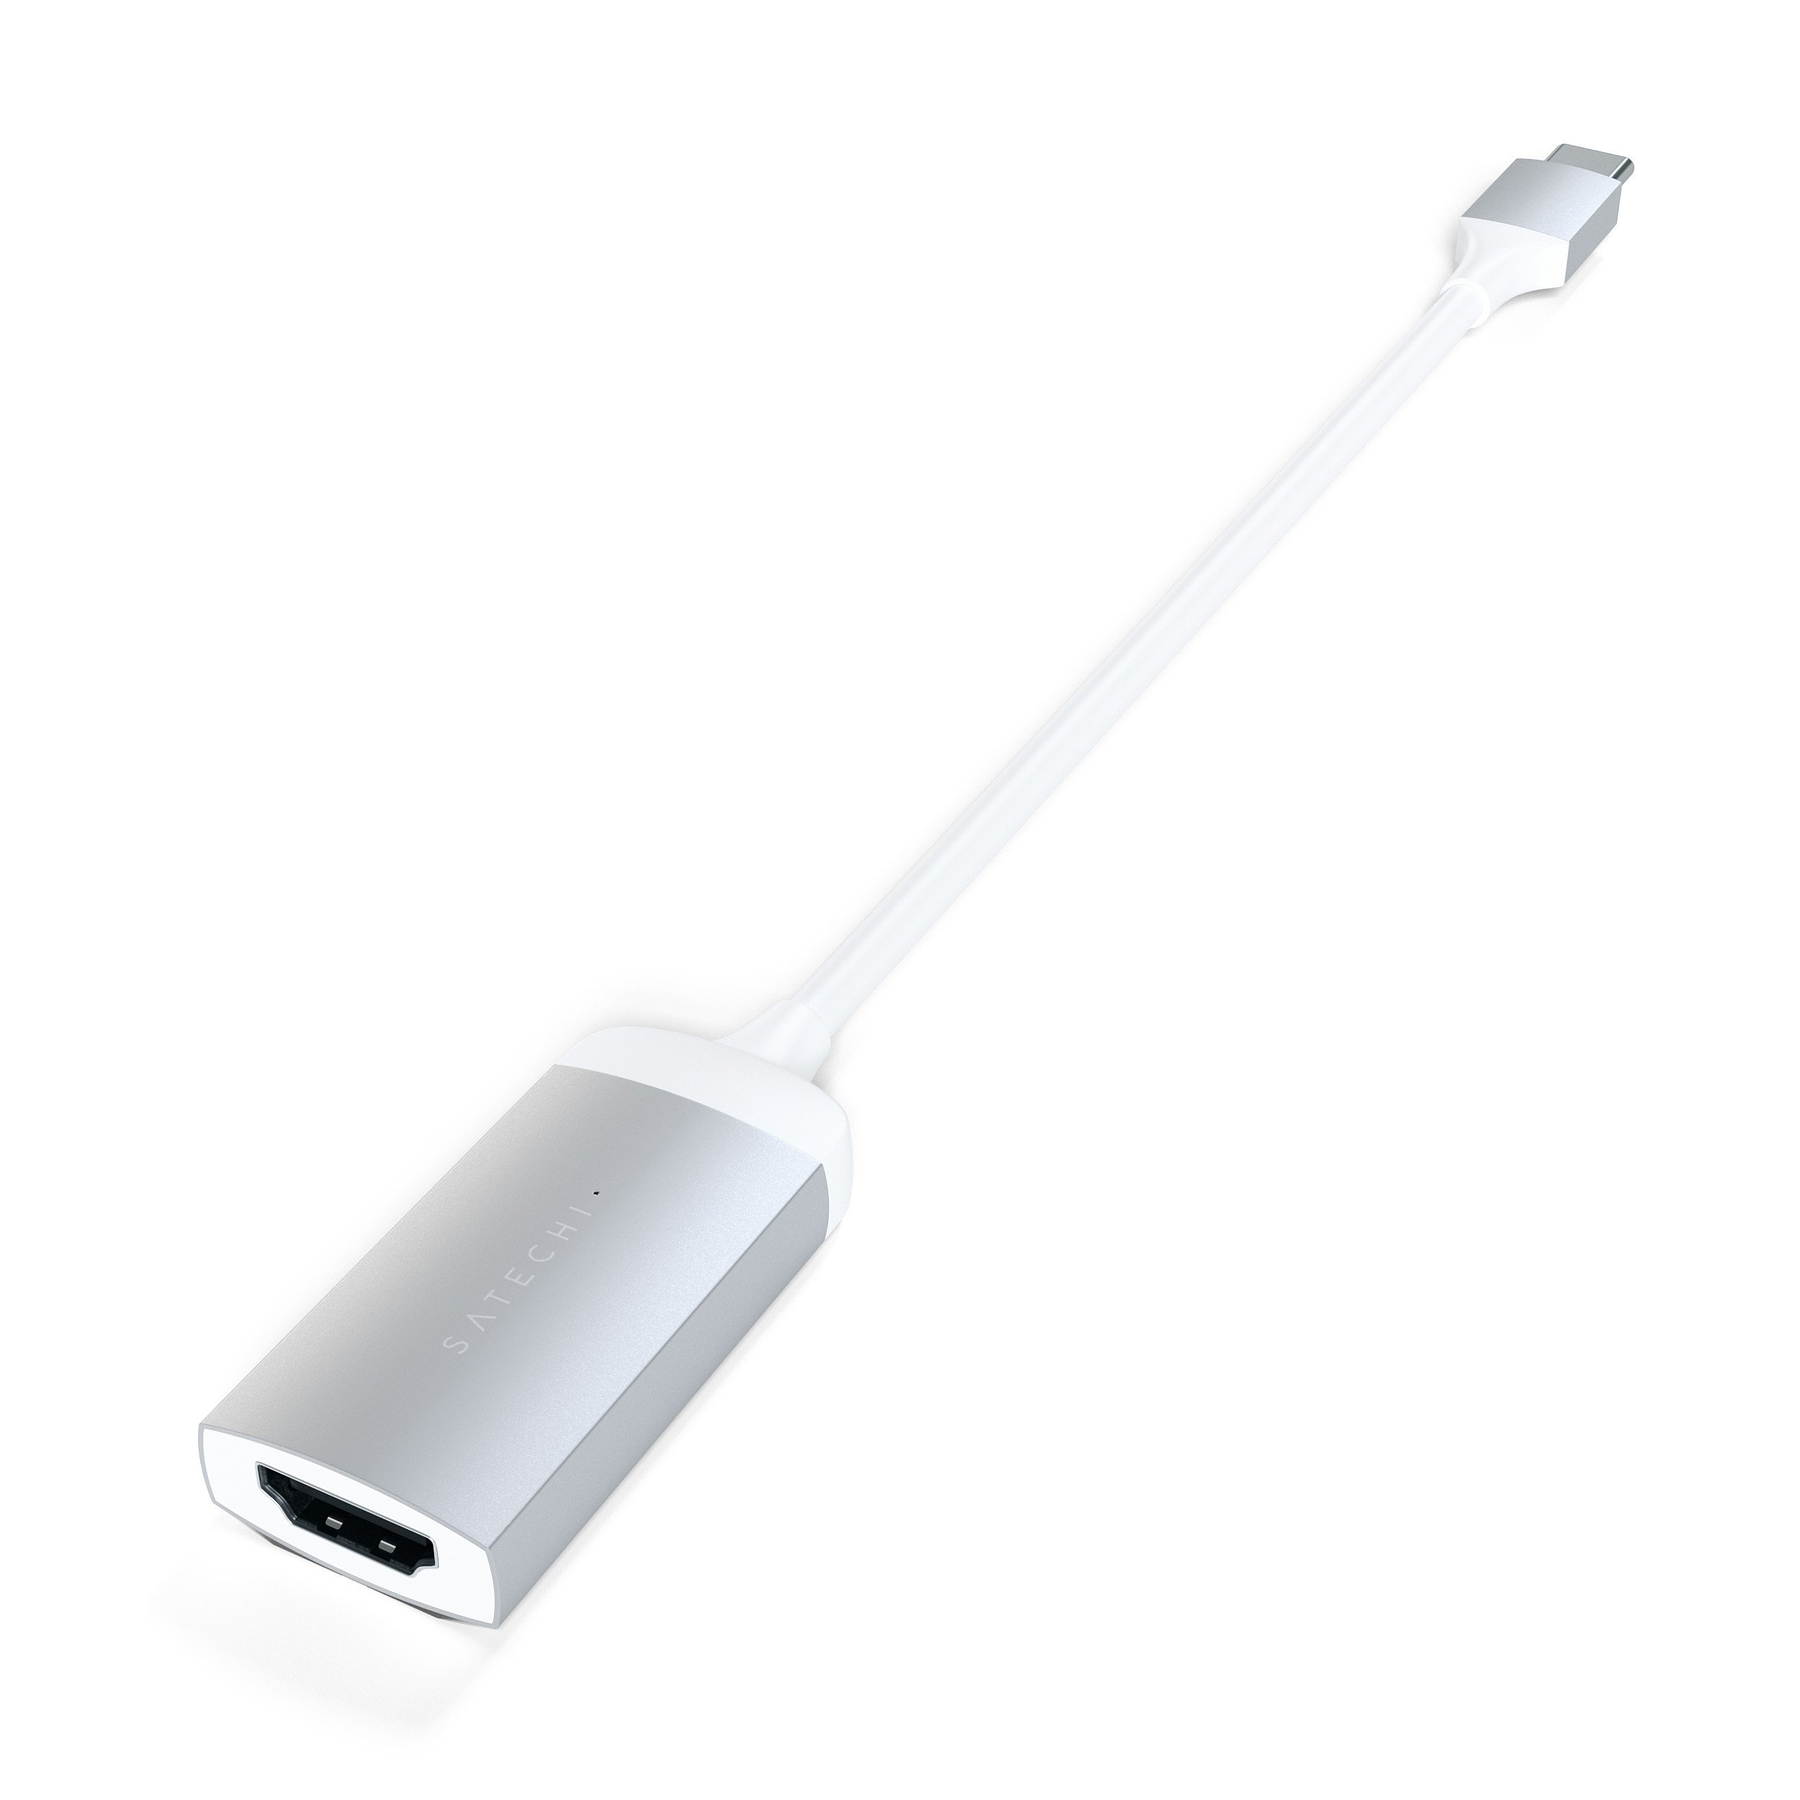 Satechi - USB-C to 4K HDMI adapter (silver)